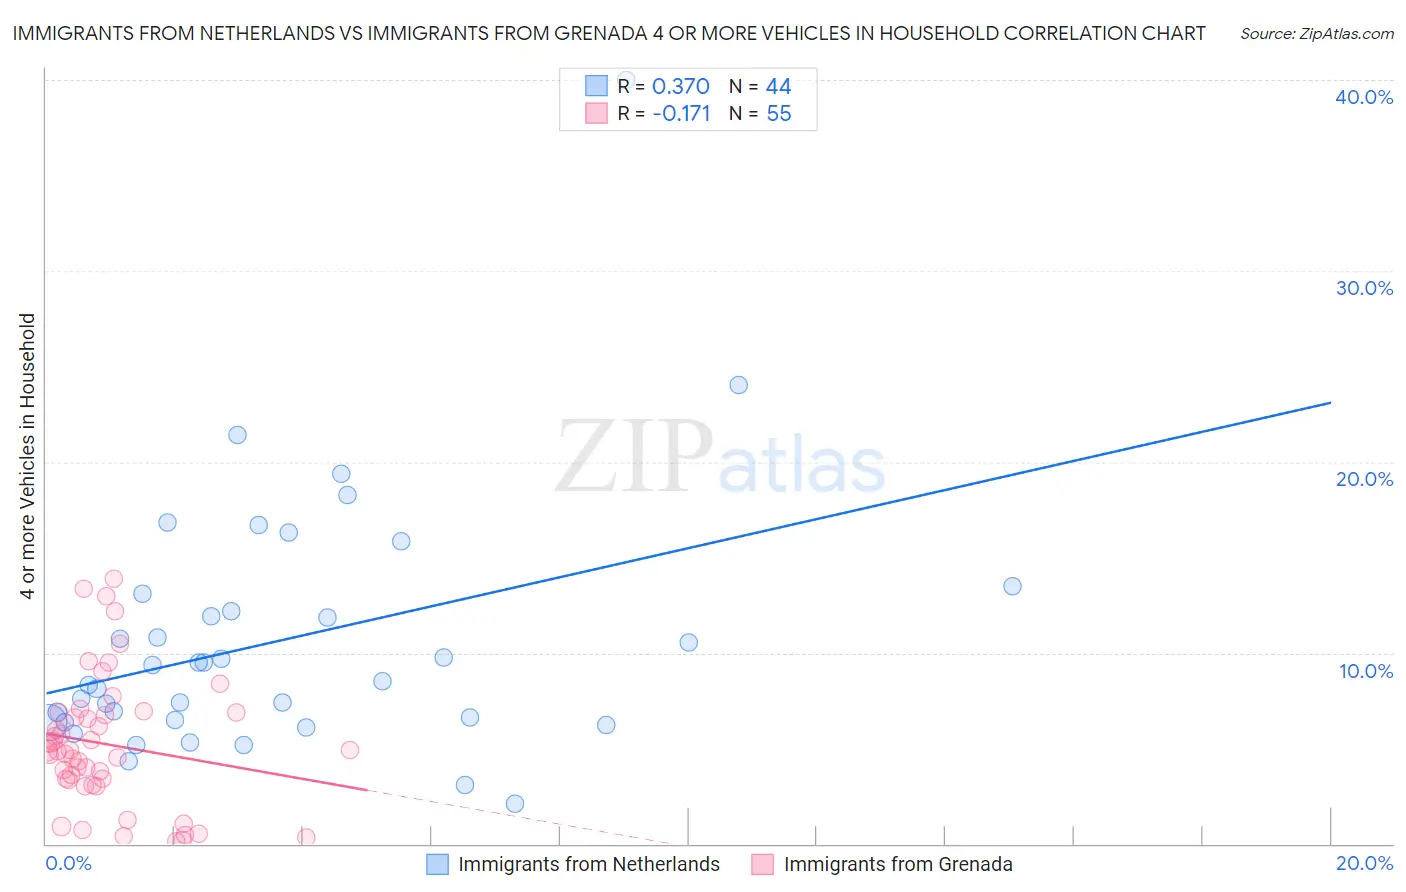 Immigrants from Netherlands vs Immigrants from Grenada 4 or more Vehicles in Household